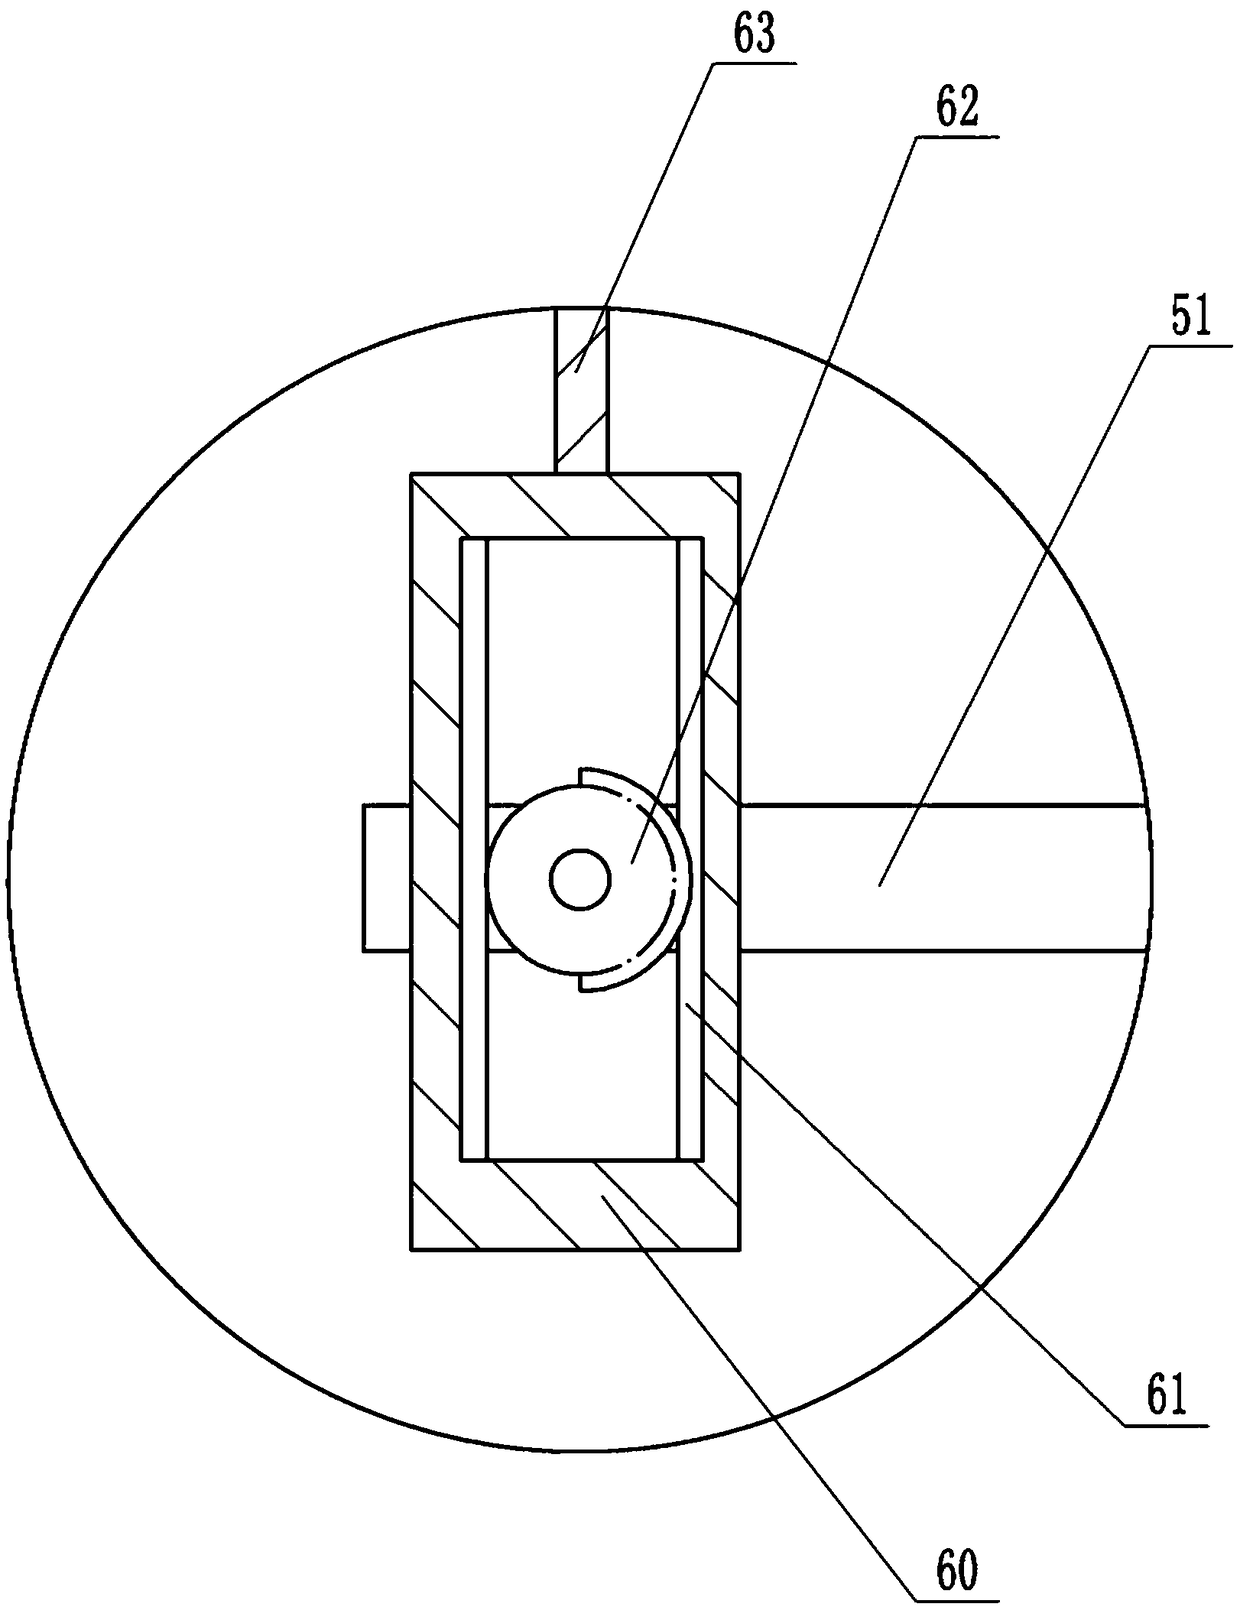 Wood grinding device